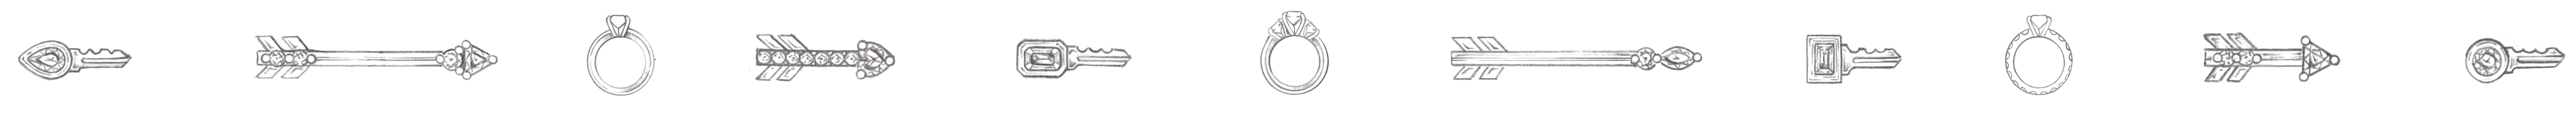 Image of hand sketched Emblems, Meili fine jewelry charms in keys, arrows, rings, with varied gemstone and diamond shapes.